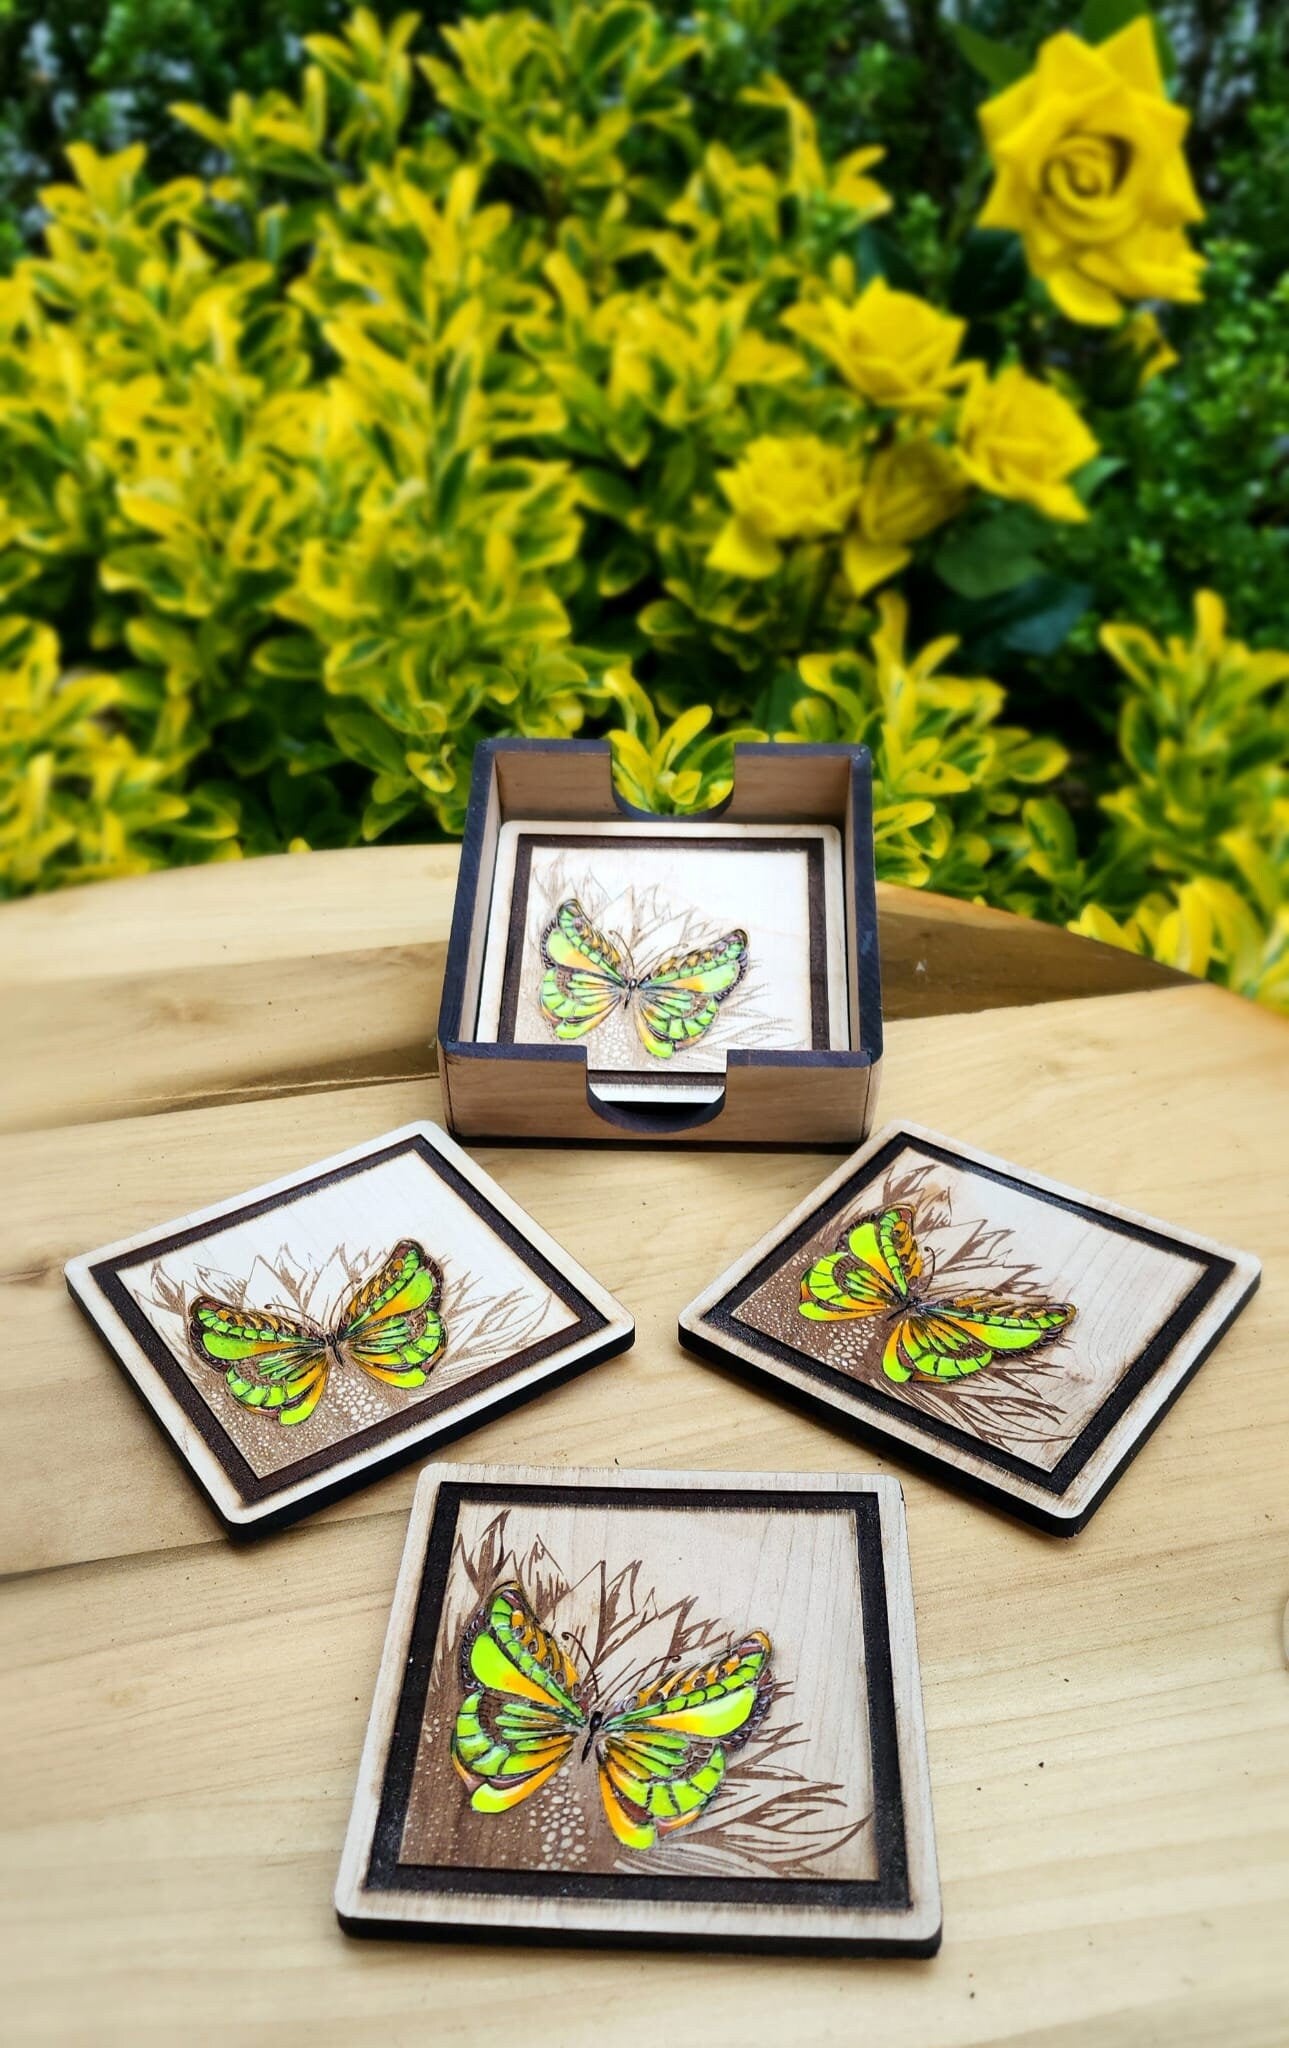 Wood And Resin Coaster, Butterfly Coaster, Porta vasos , Coaster gift, Anniversary Gift, Wedding Gift , Occasion Gift, Resin, Wood Art .